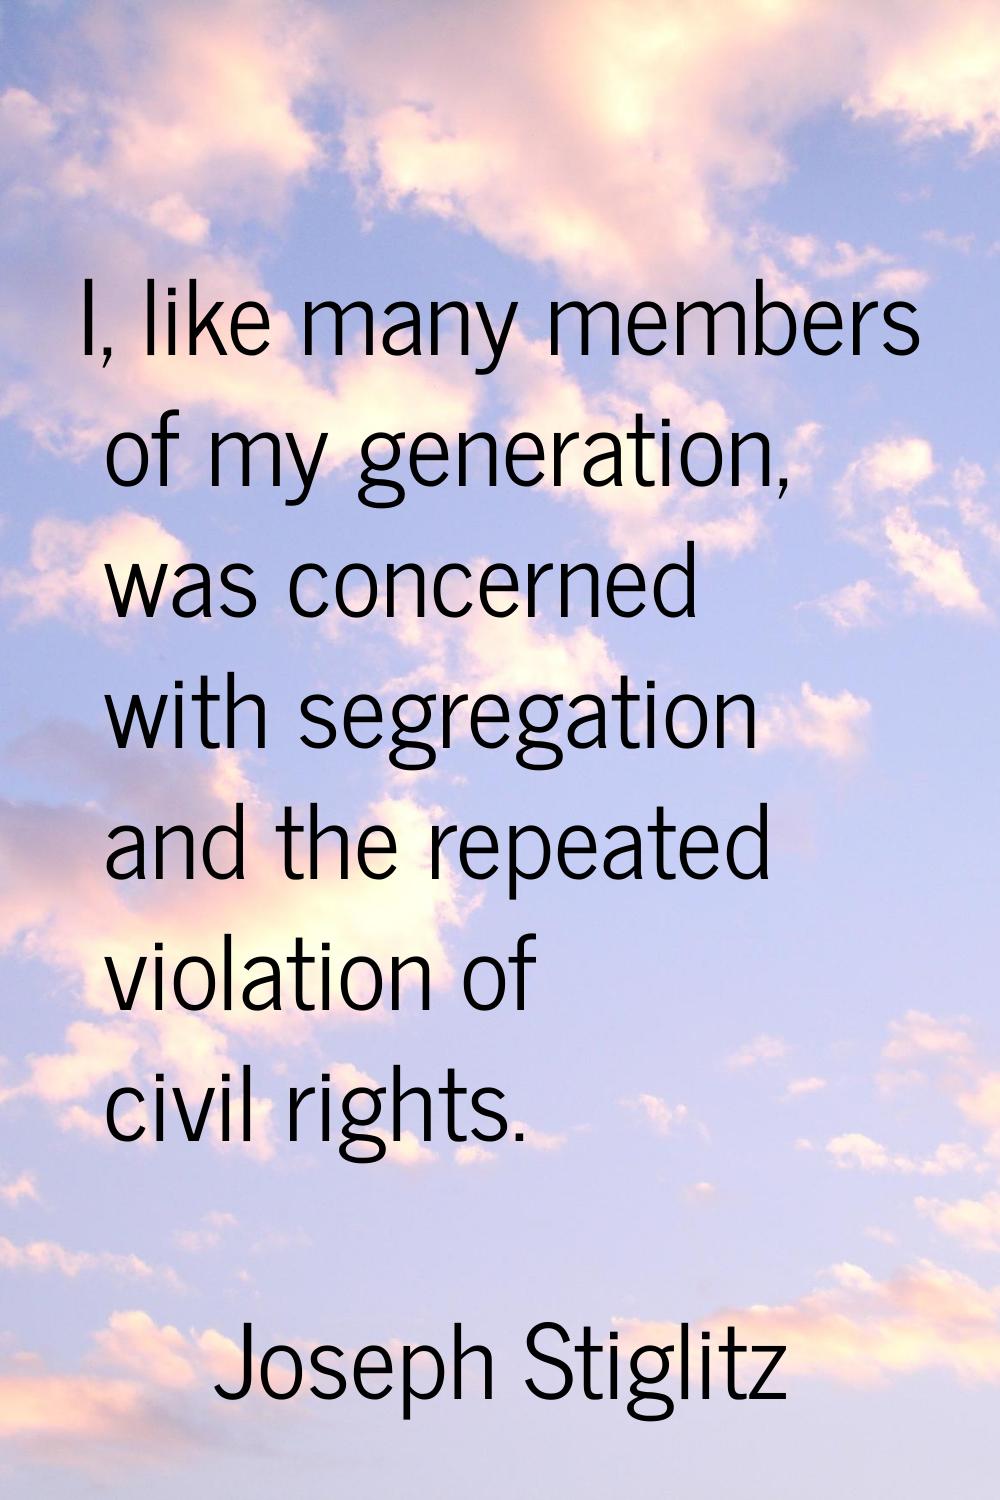 I, like many members of my generation, was concerned with segregation and the repeated violation of